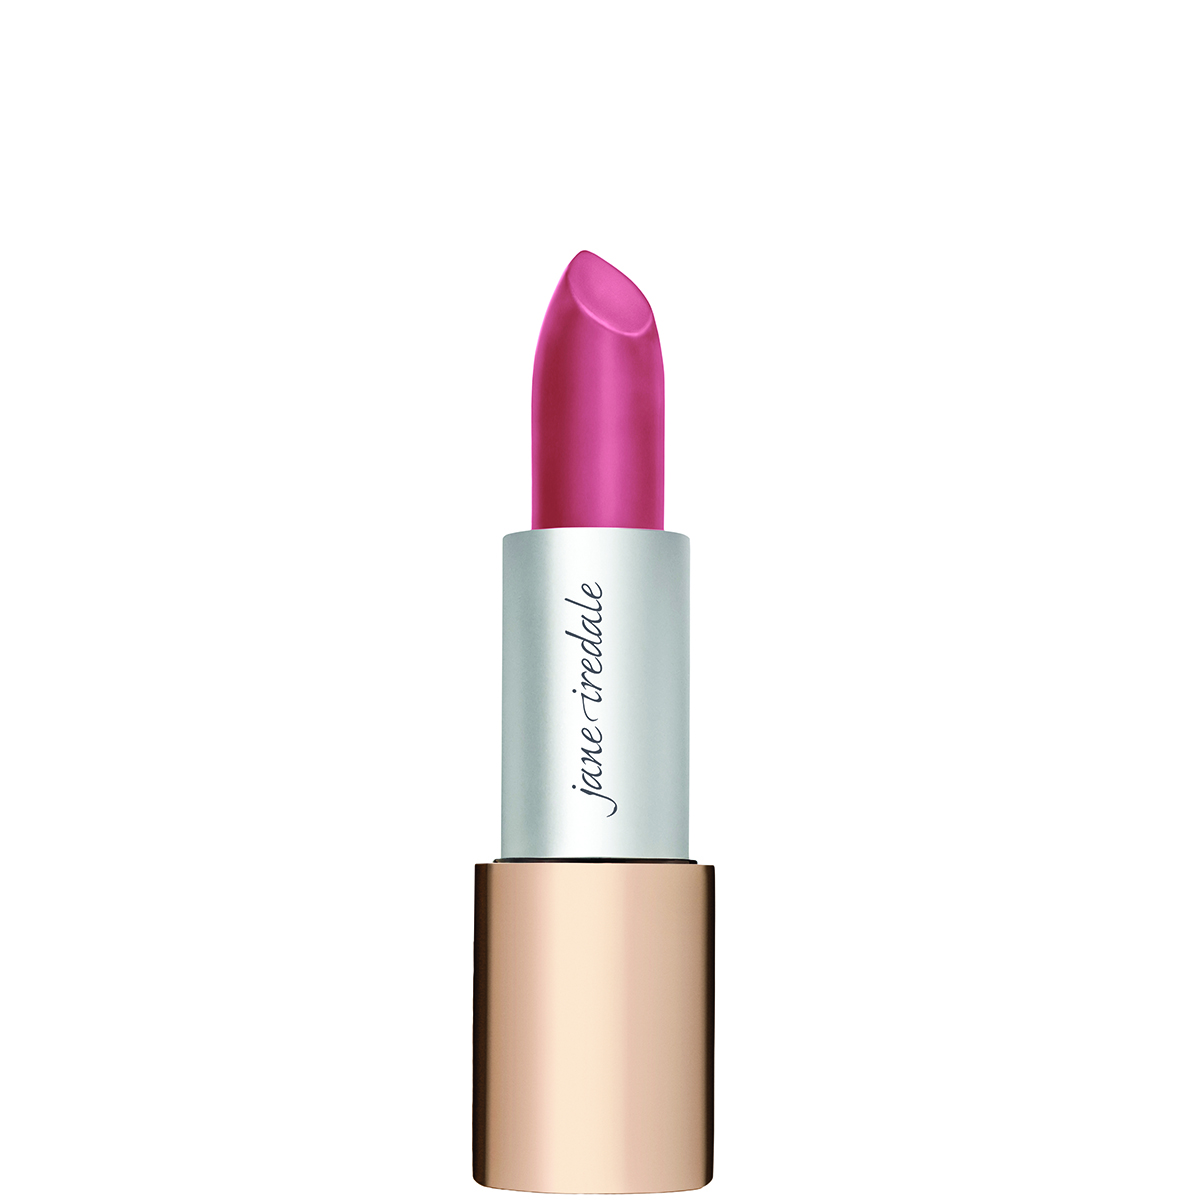 Jane Iredale Triple Luxe Long Lasting Naturally Moist Lipstick Tania